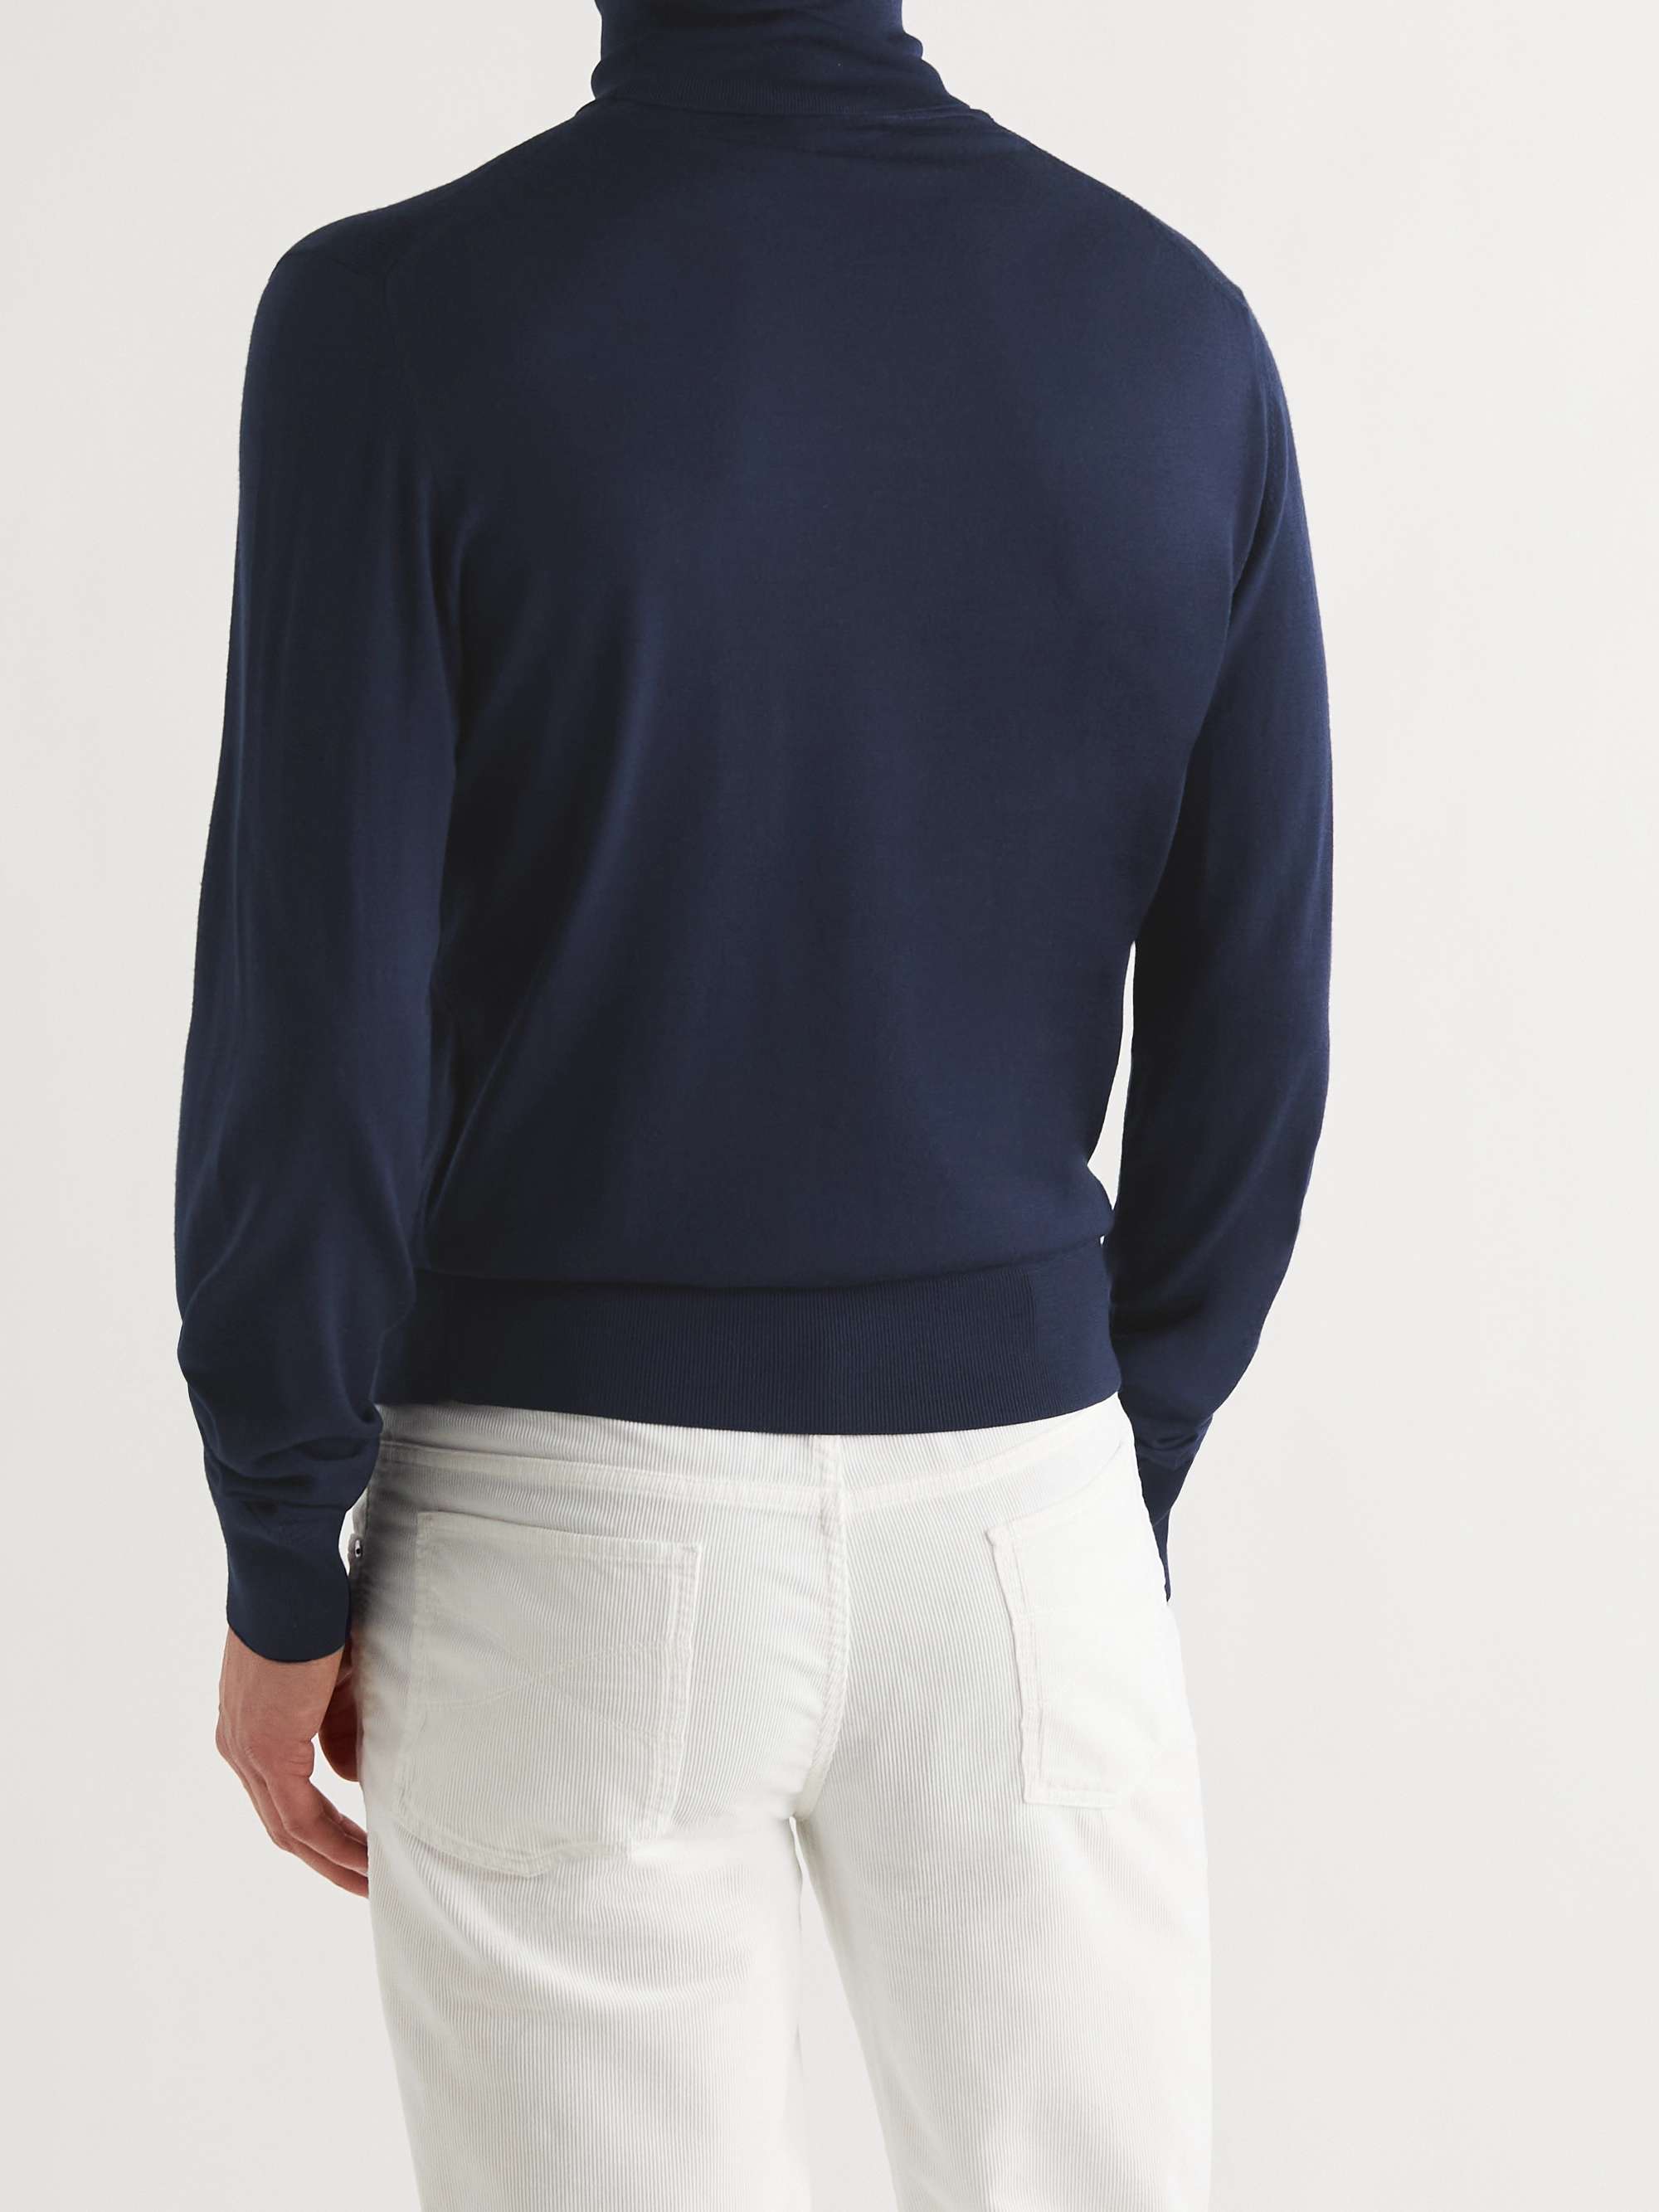 TOM FORD Slim-Fit Wool Rollneck Sweater